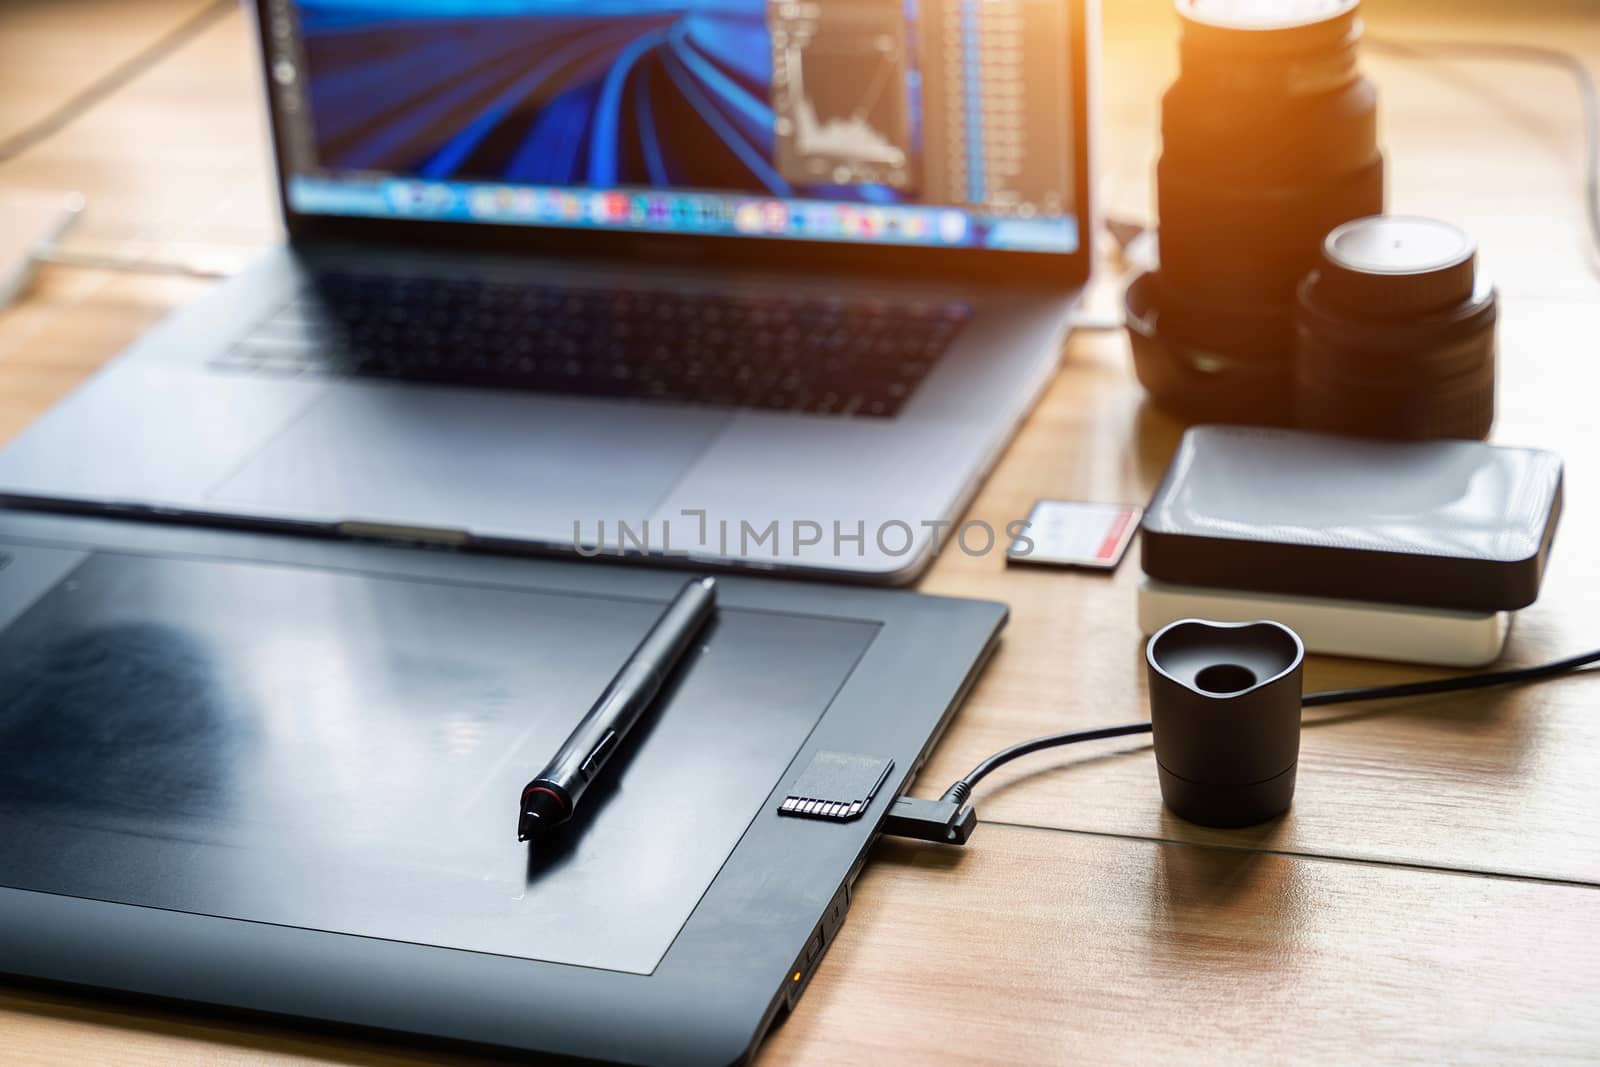 Drawing tablet and laptop computer, harddisk, memory card, camera lens on table. Photographer concept.